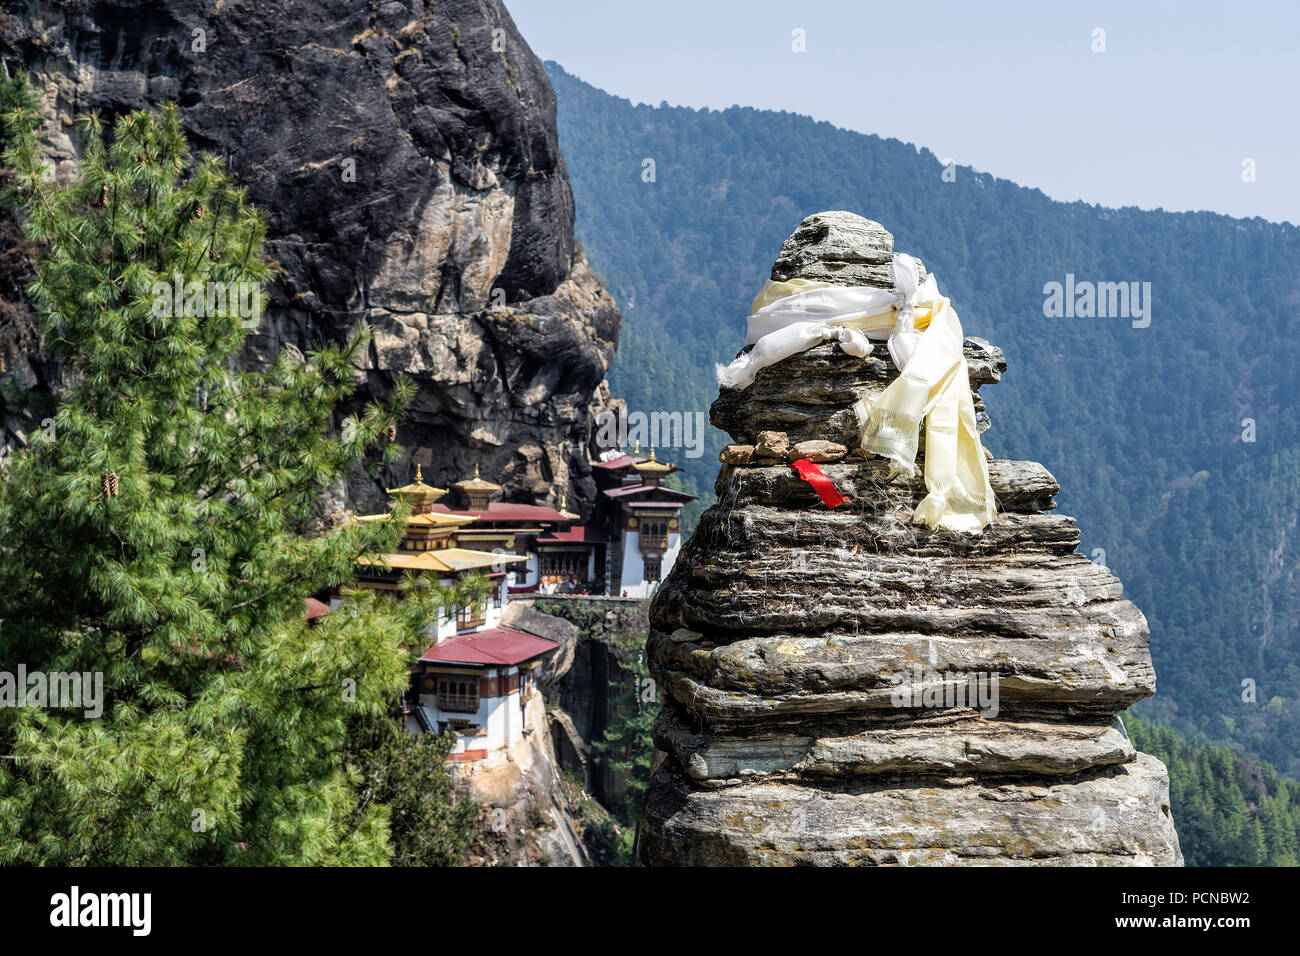 View Point of Taktshang monastery, Bhutan - Tigers Nest Monastery also know as Taktsang Palphug Monastery. This image is purposely blurred out the bla Stock Photo